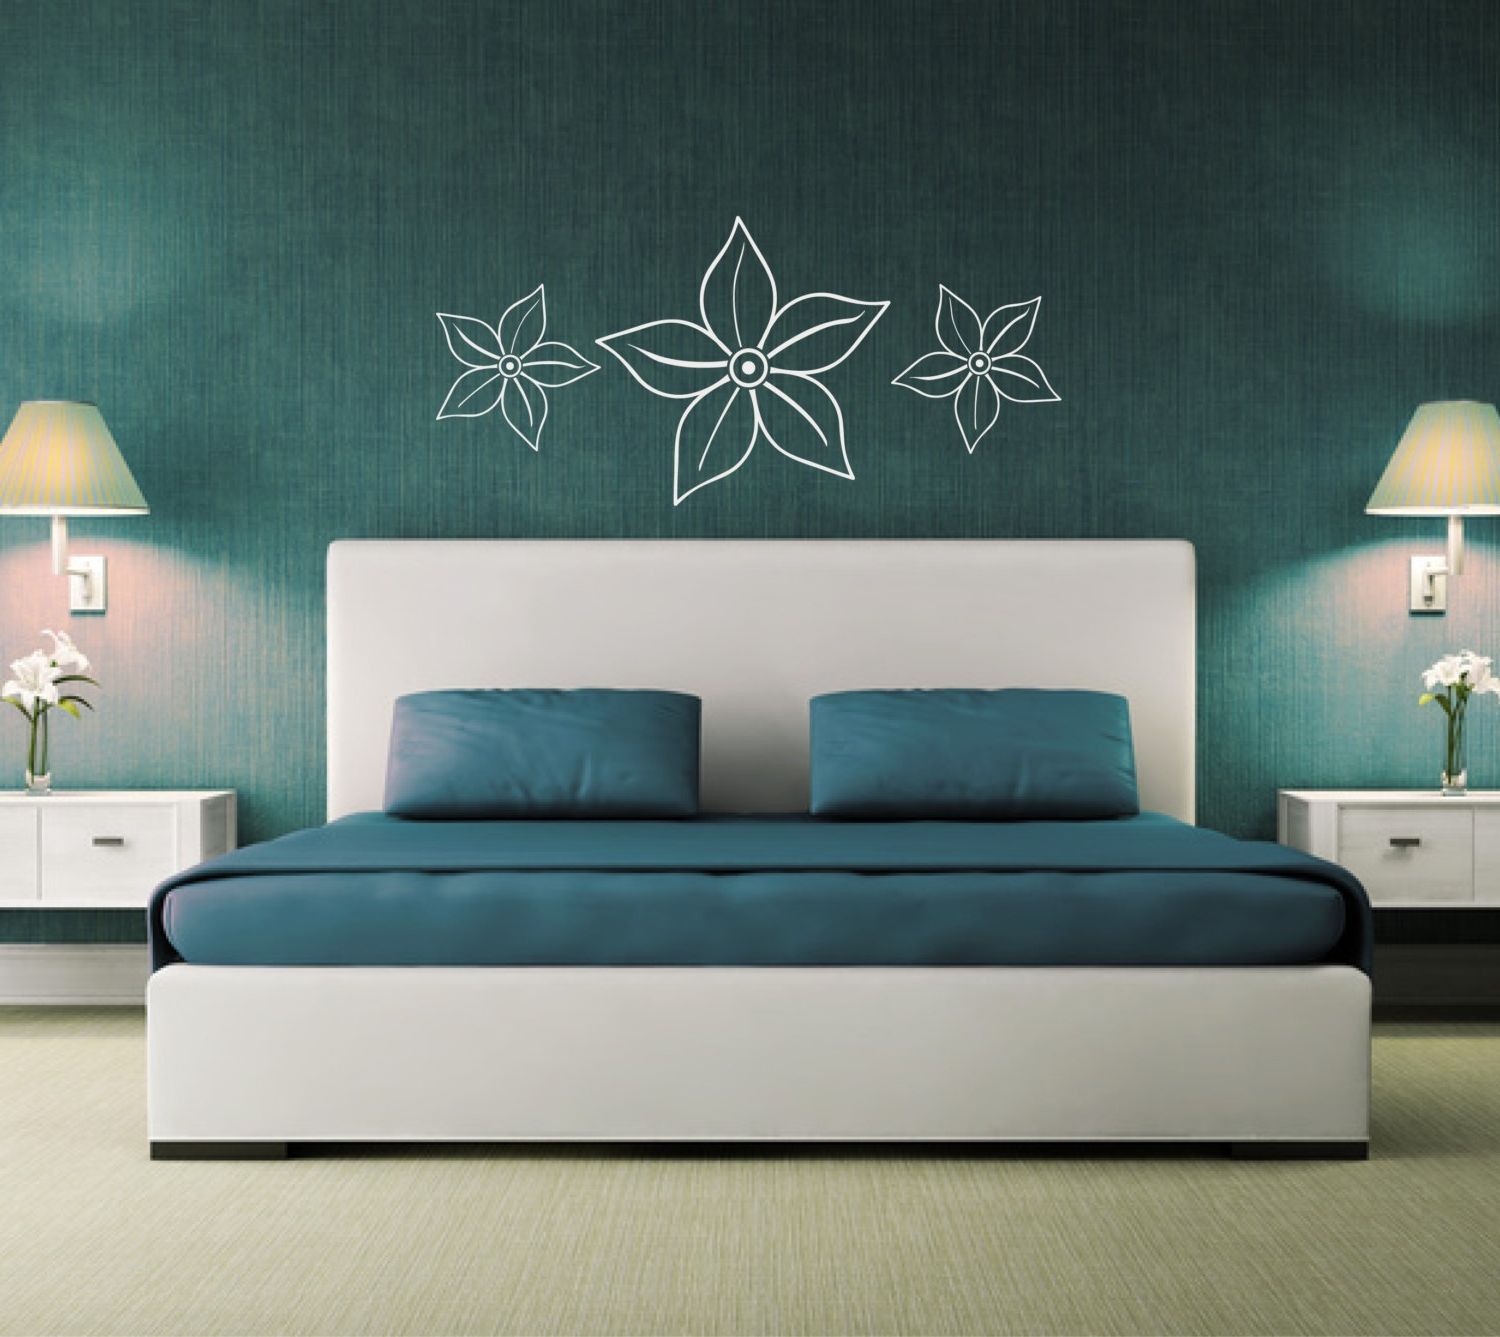 Over The Bed Wall Art Pertaining To Most Popular Flower Wall Sticker (View 5 of 15)